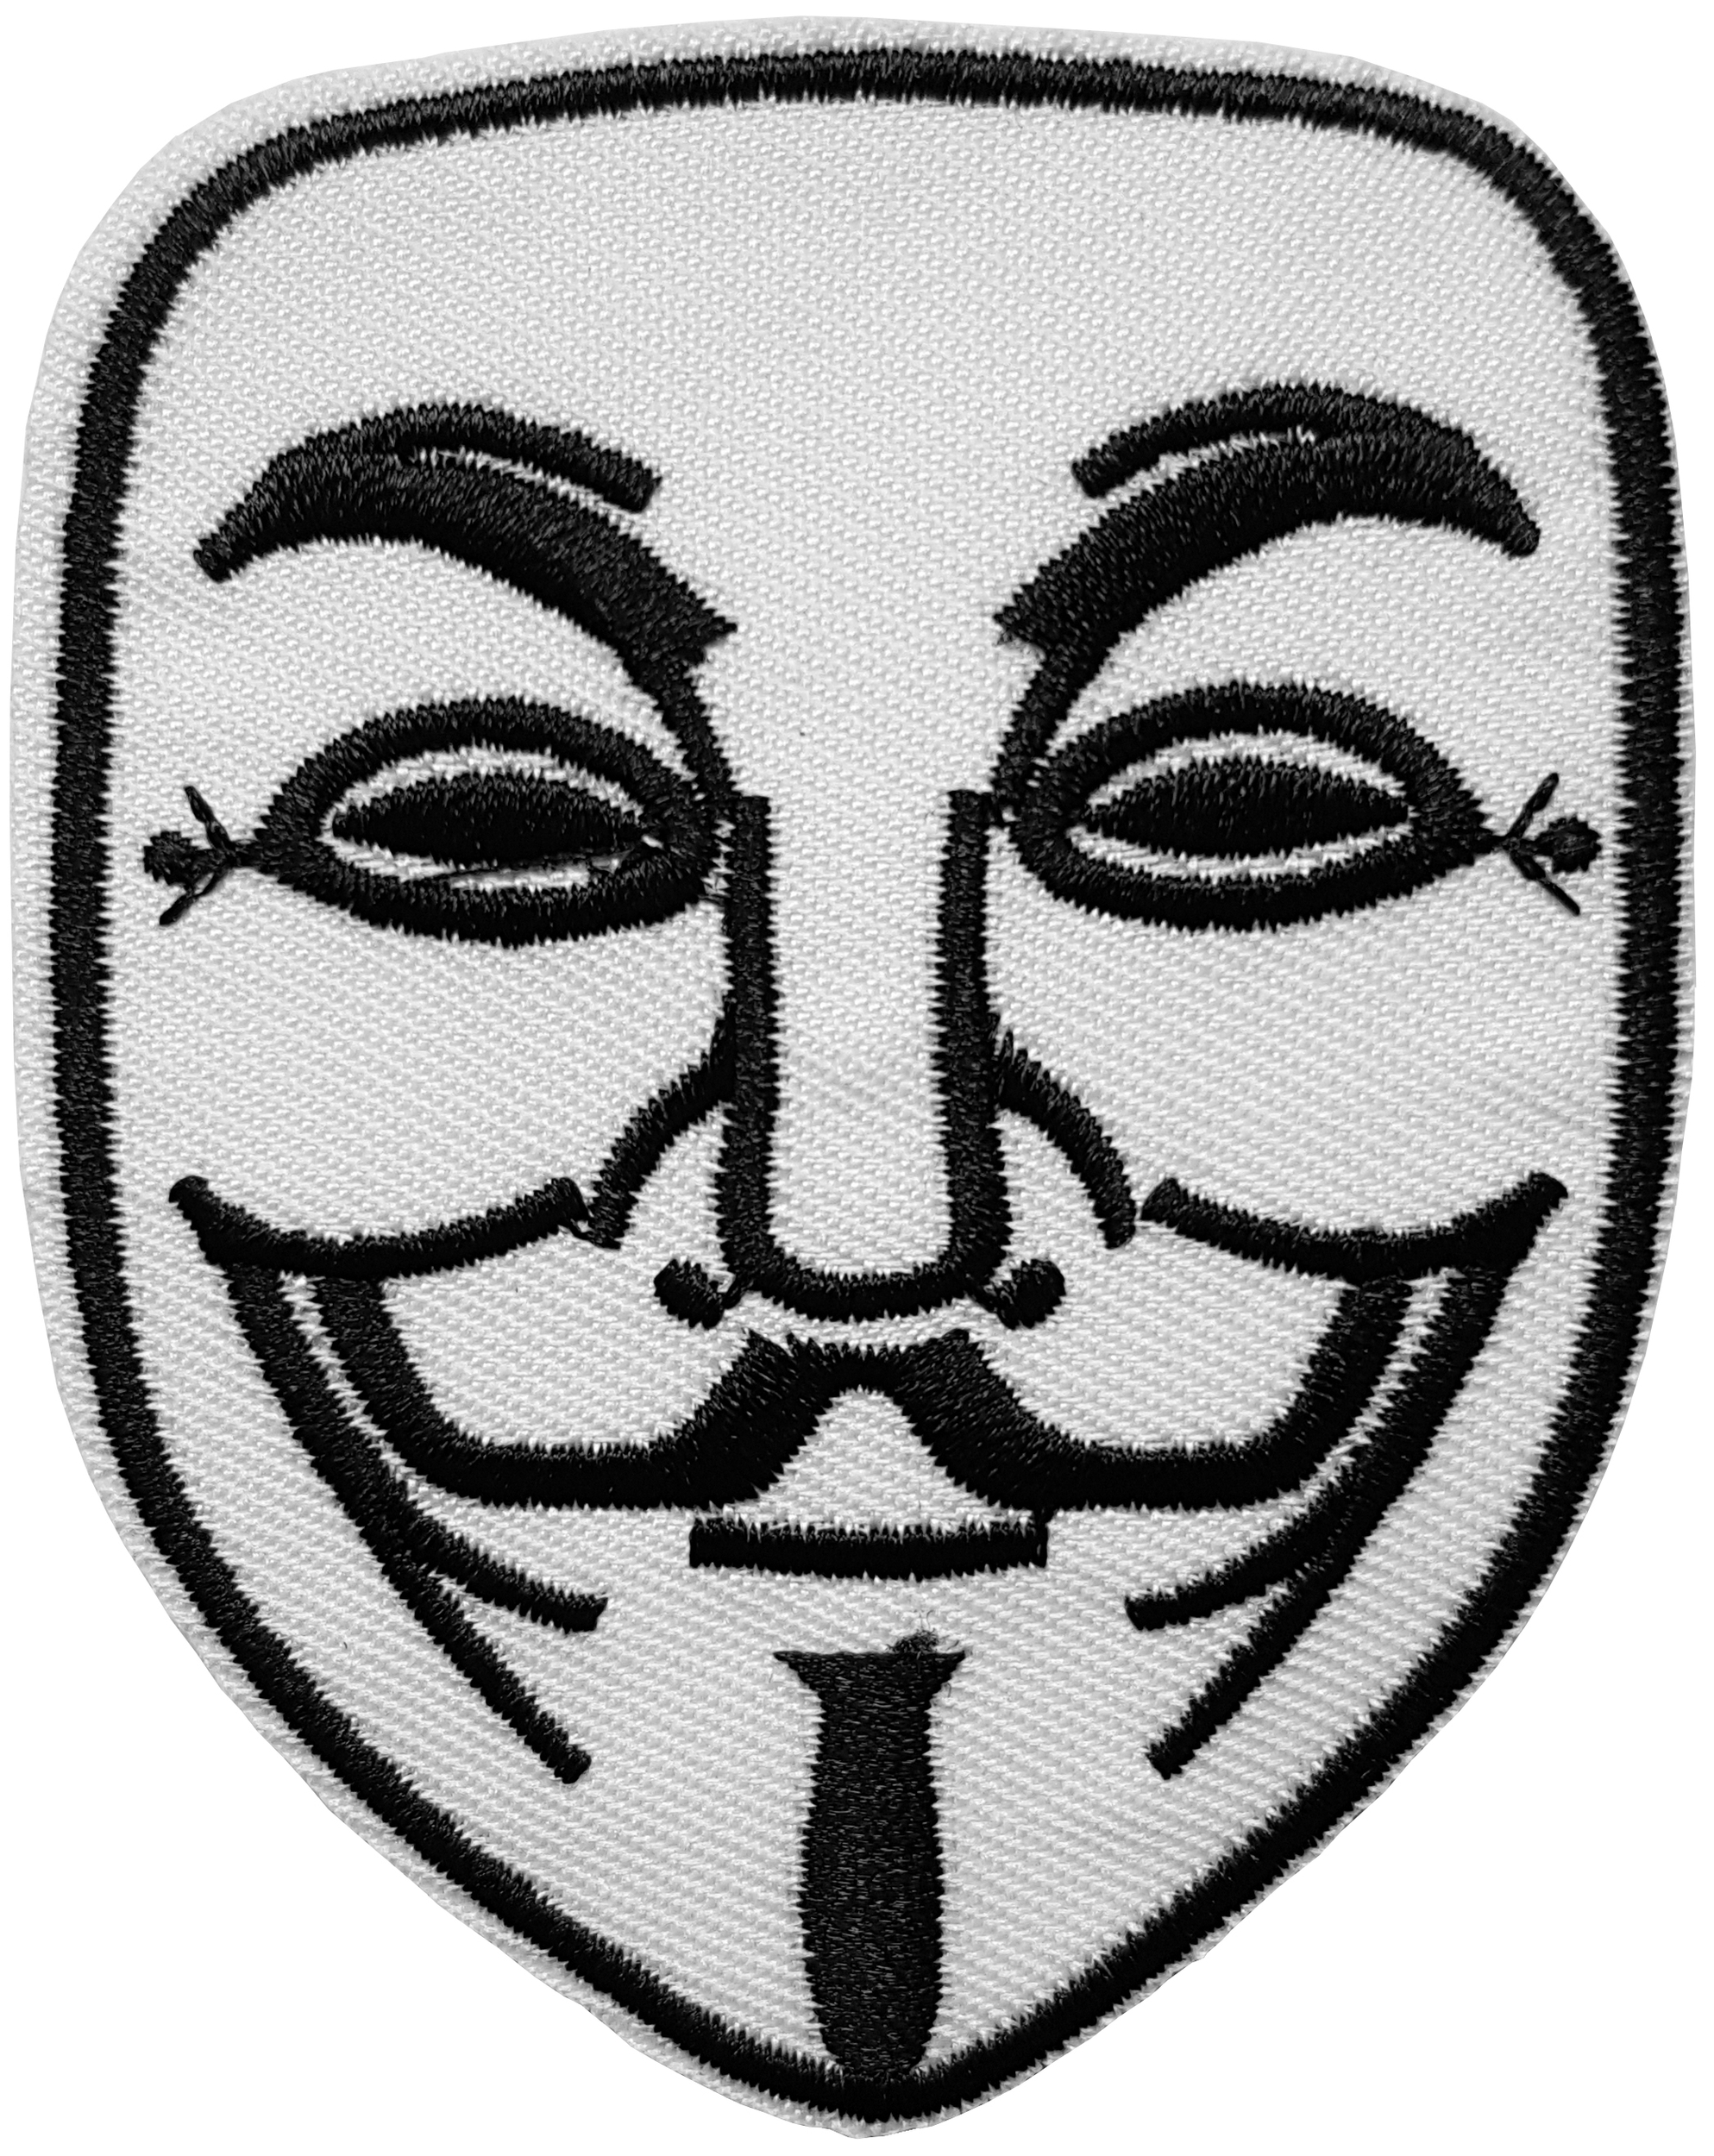 Patch Thermocollant Masque Anonymous Guy Fawkes V pour Vendetta